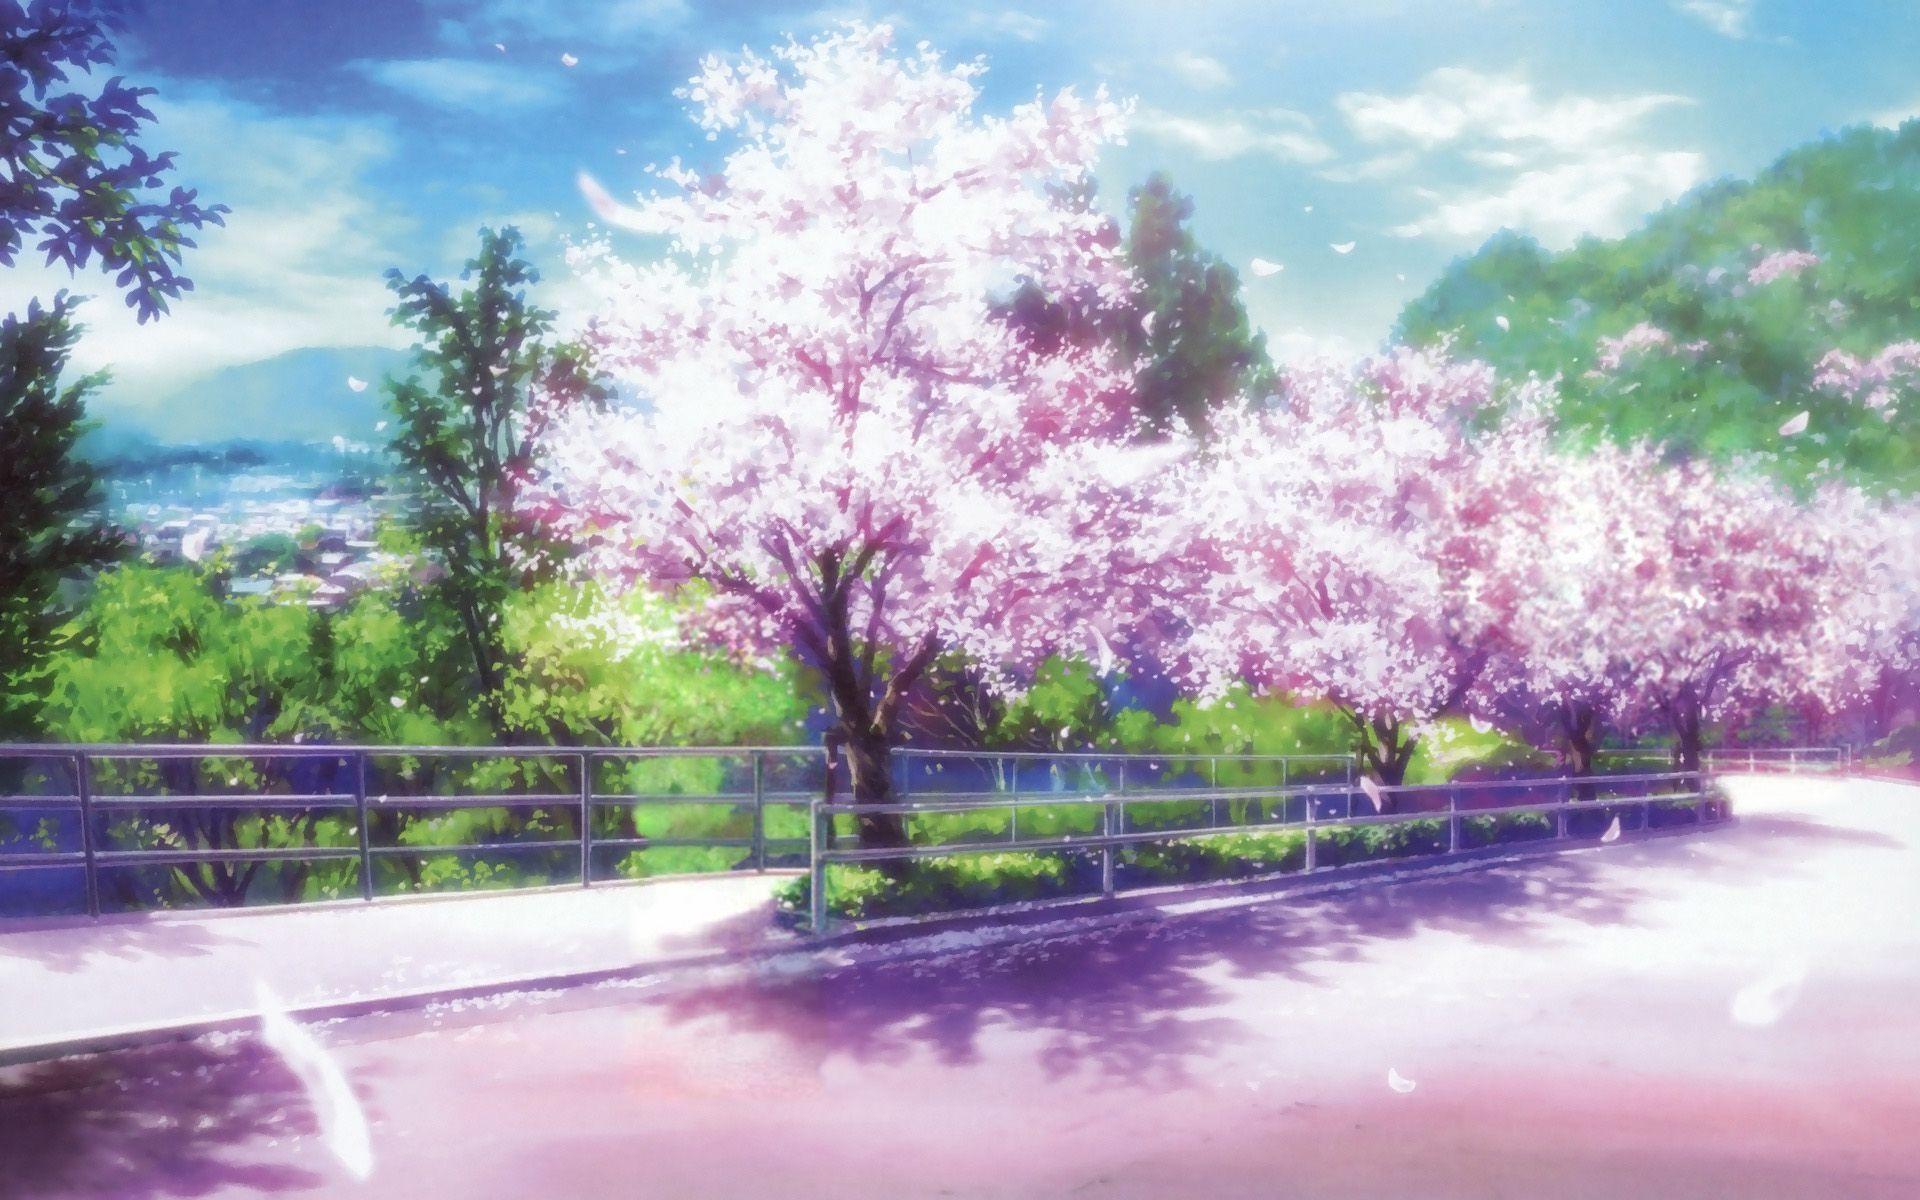 Cherry Blossoms Anime Scenery Wallpapers - Top Free Cherry Blossoms